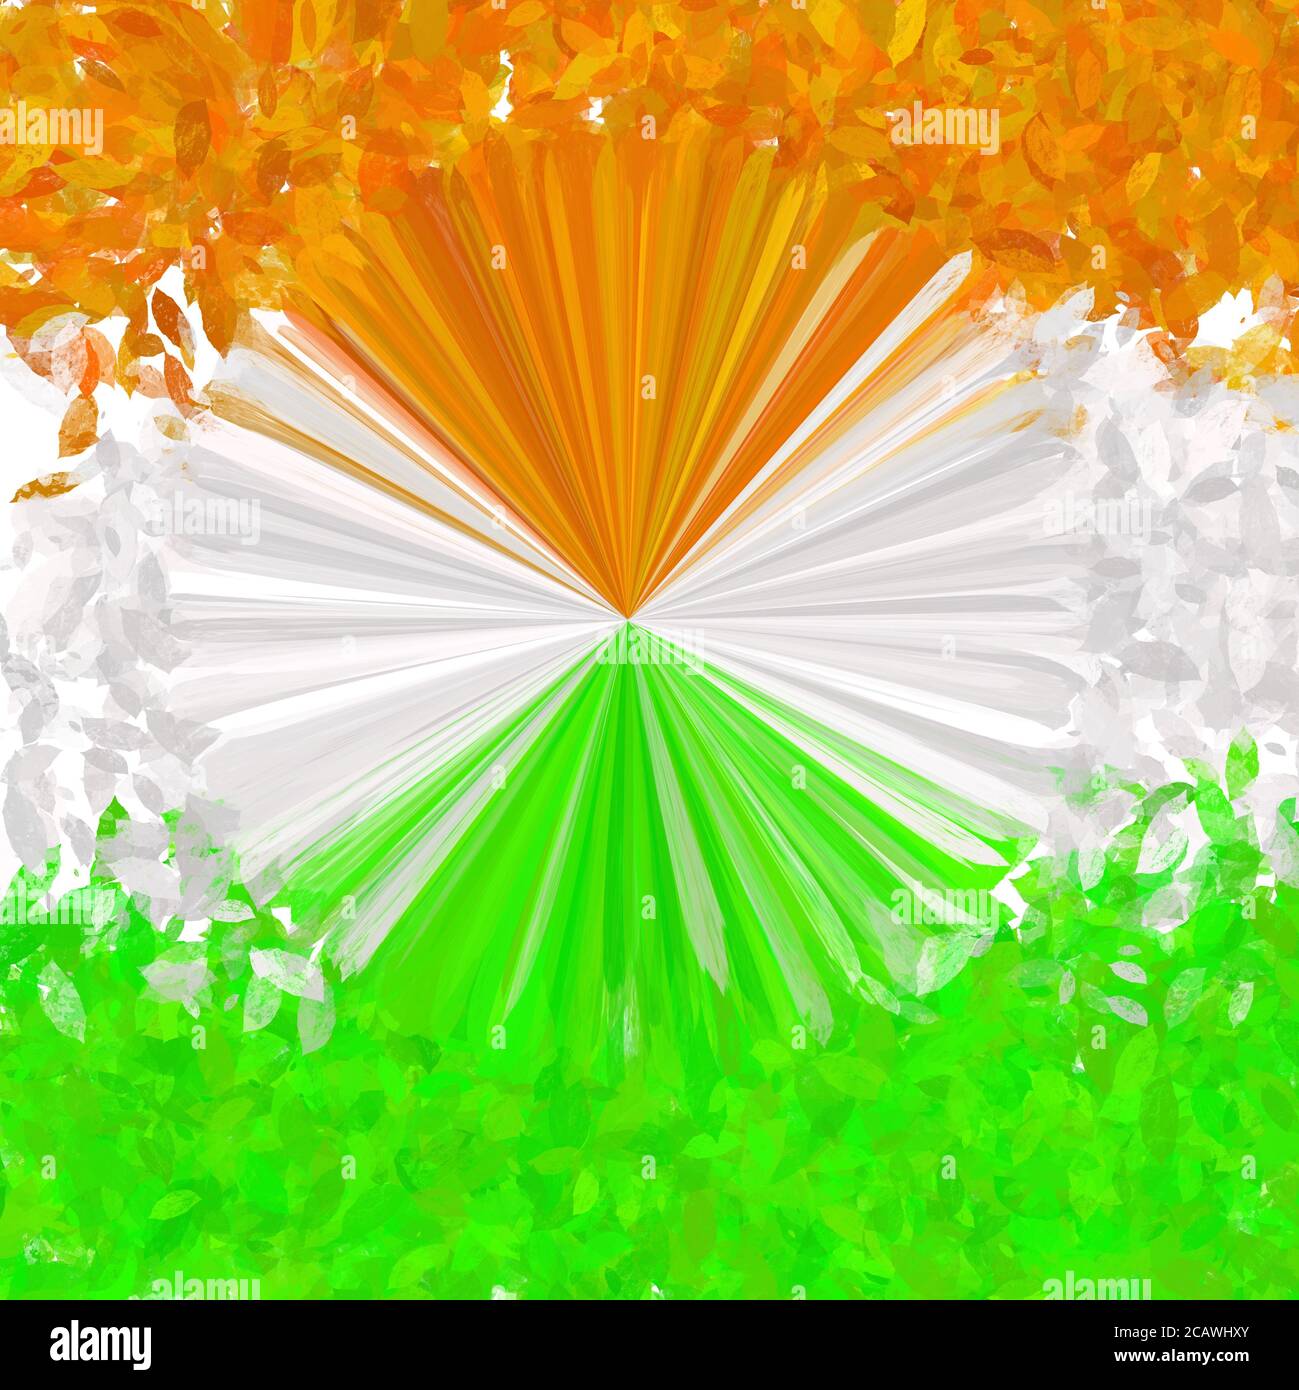 Indian tricolour background mainly for Indian Independence Day Stock Photo  - Alamy